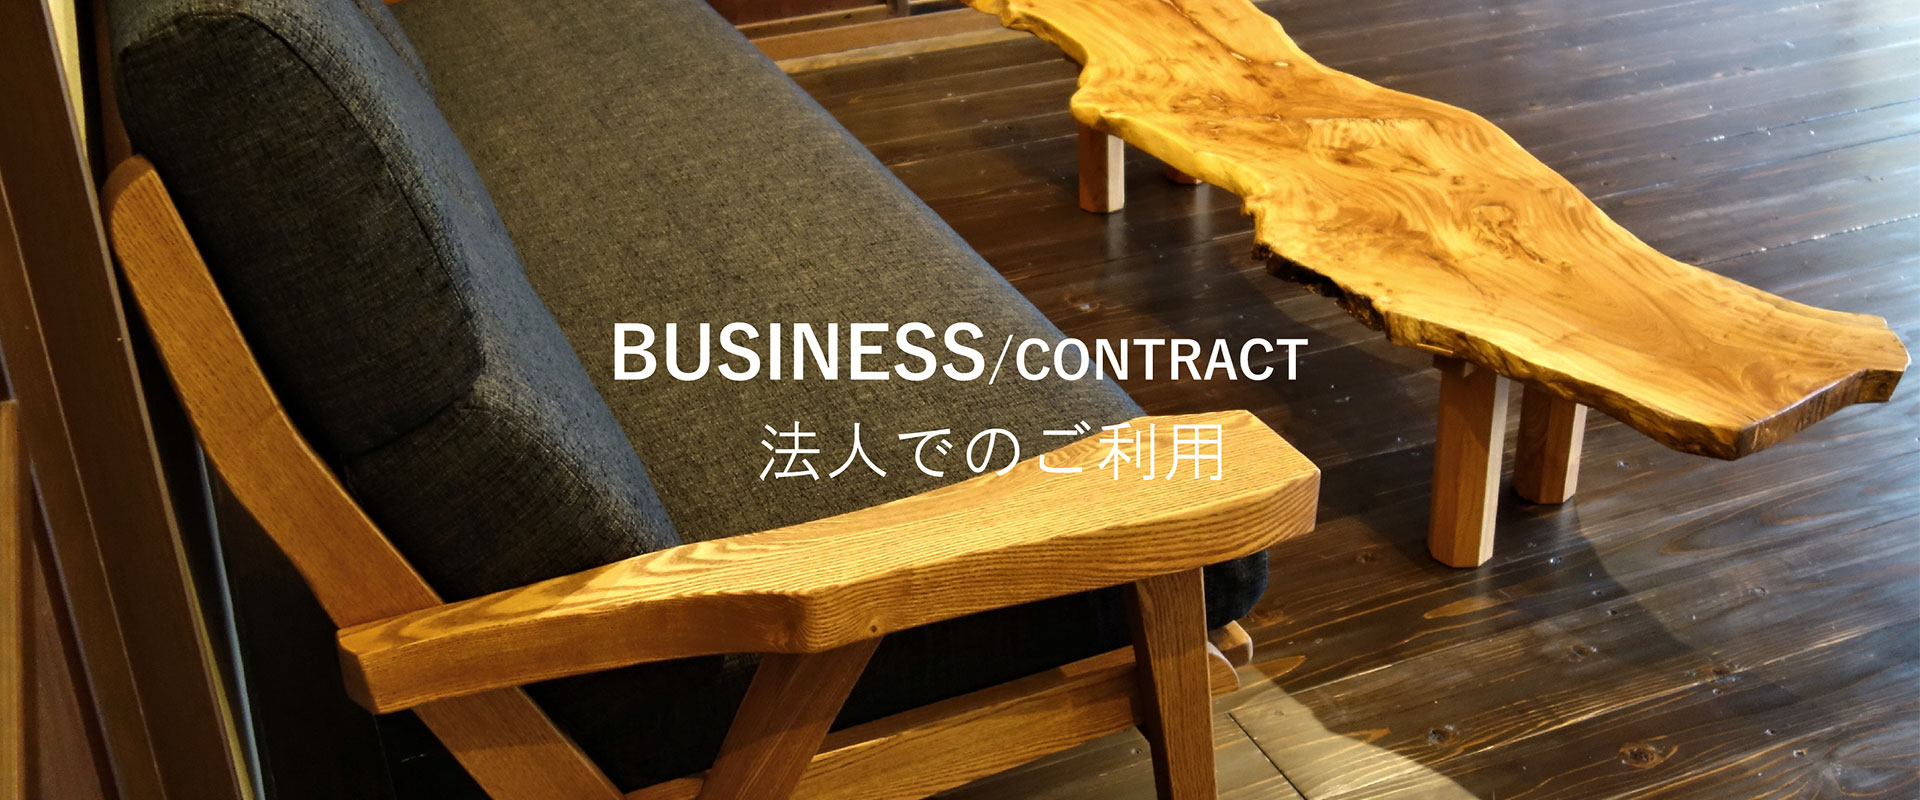 BUSINESS/CONTRACT